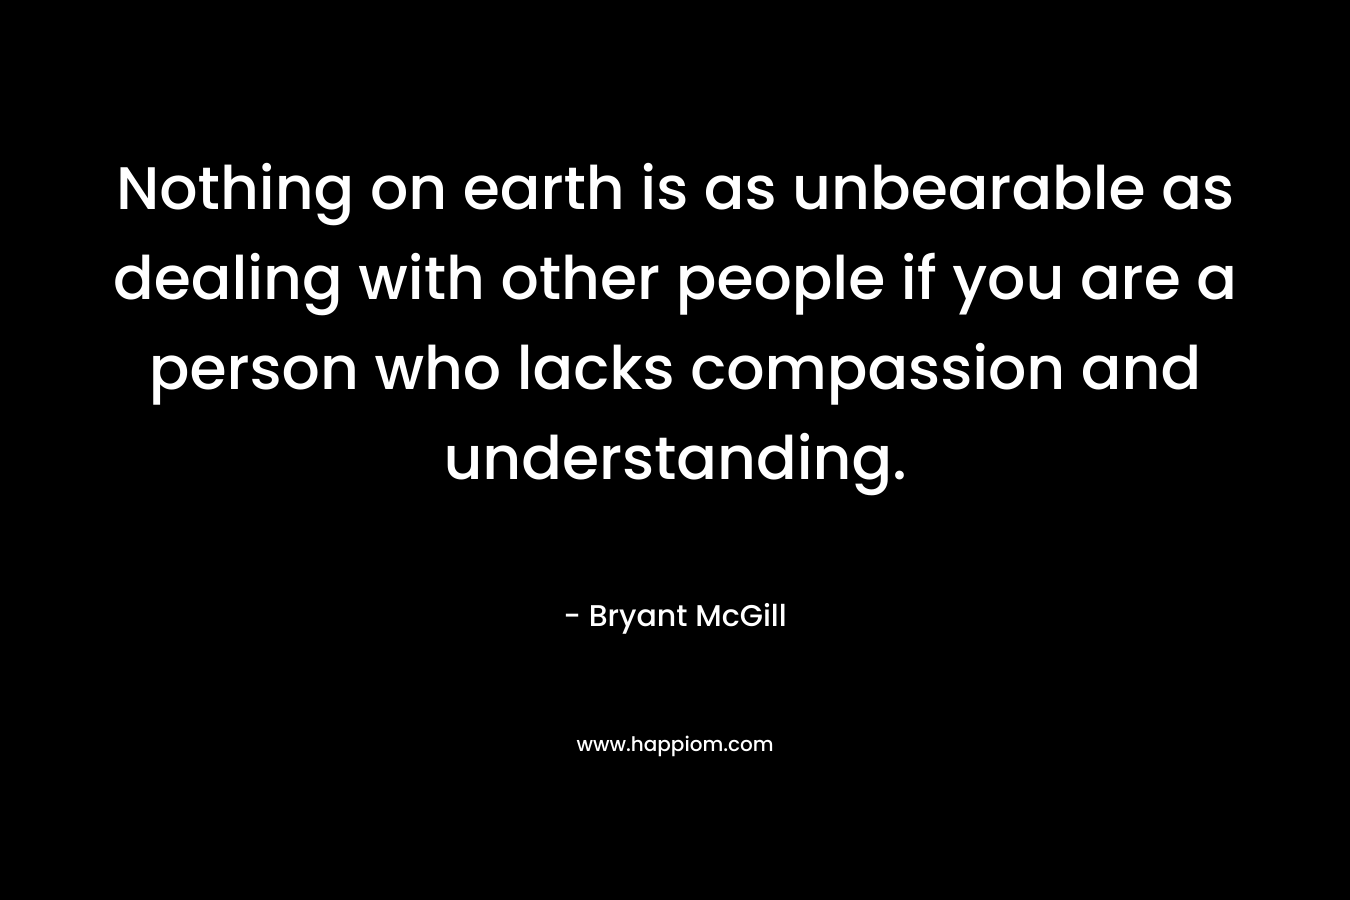 Nothing on earth is as unbearable as dealing with other people if you are a person who lacks compassion and understanding. – Bryant McGill